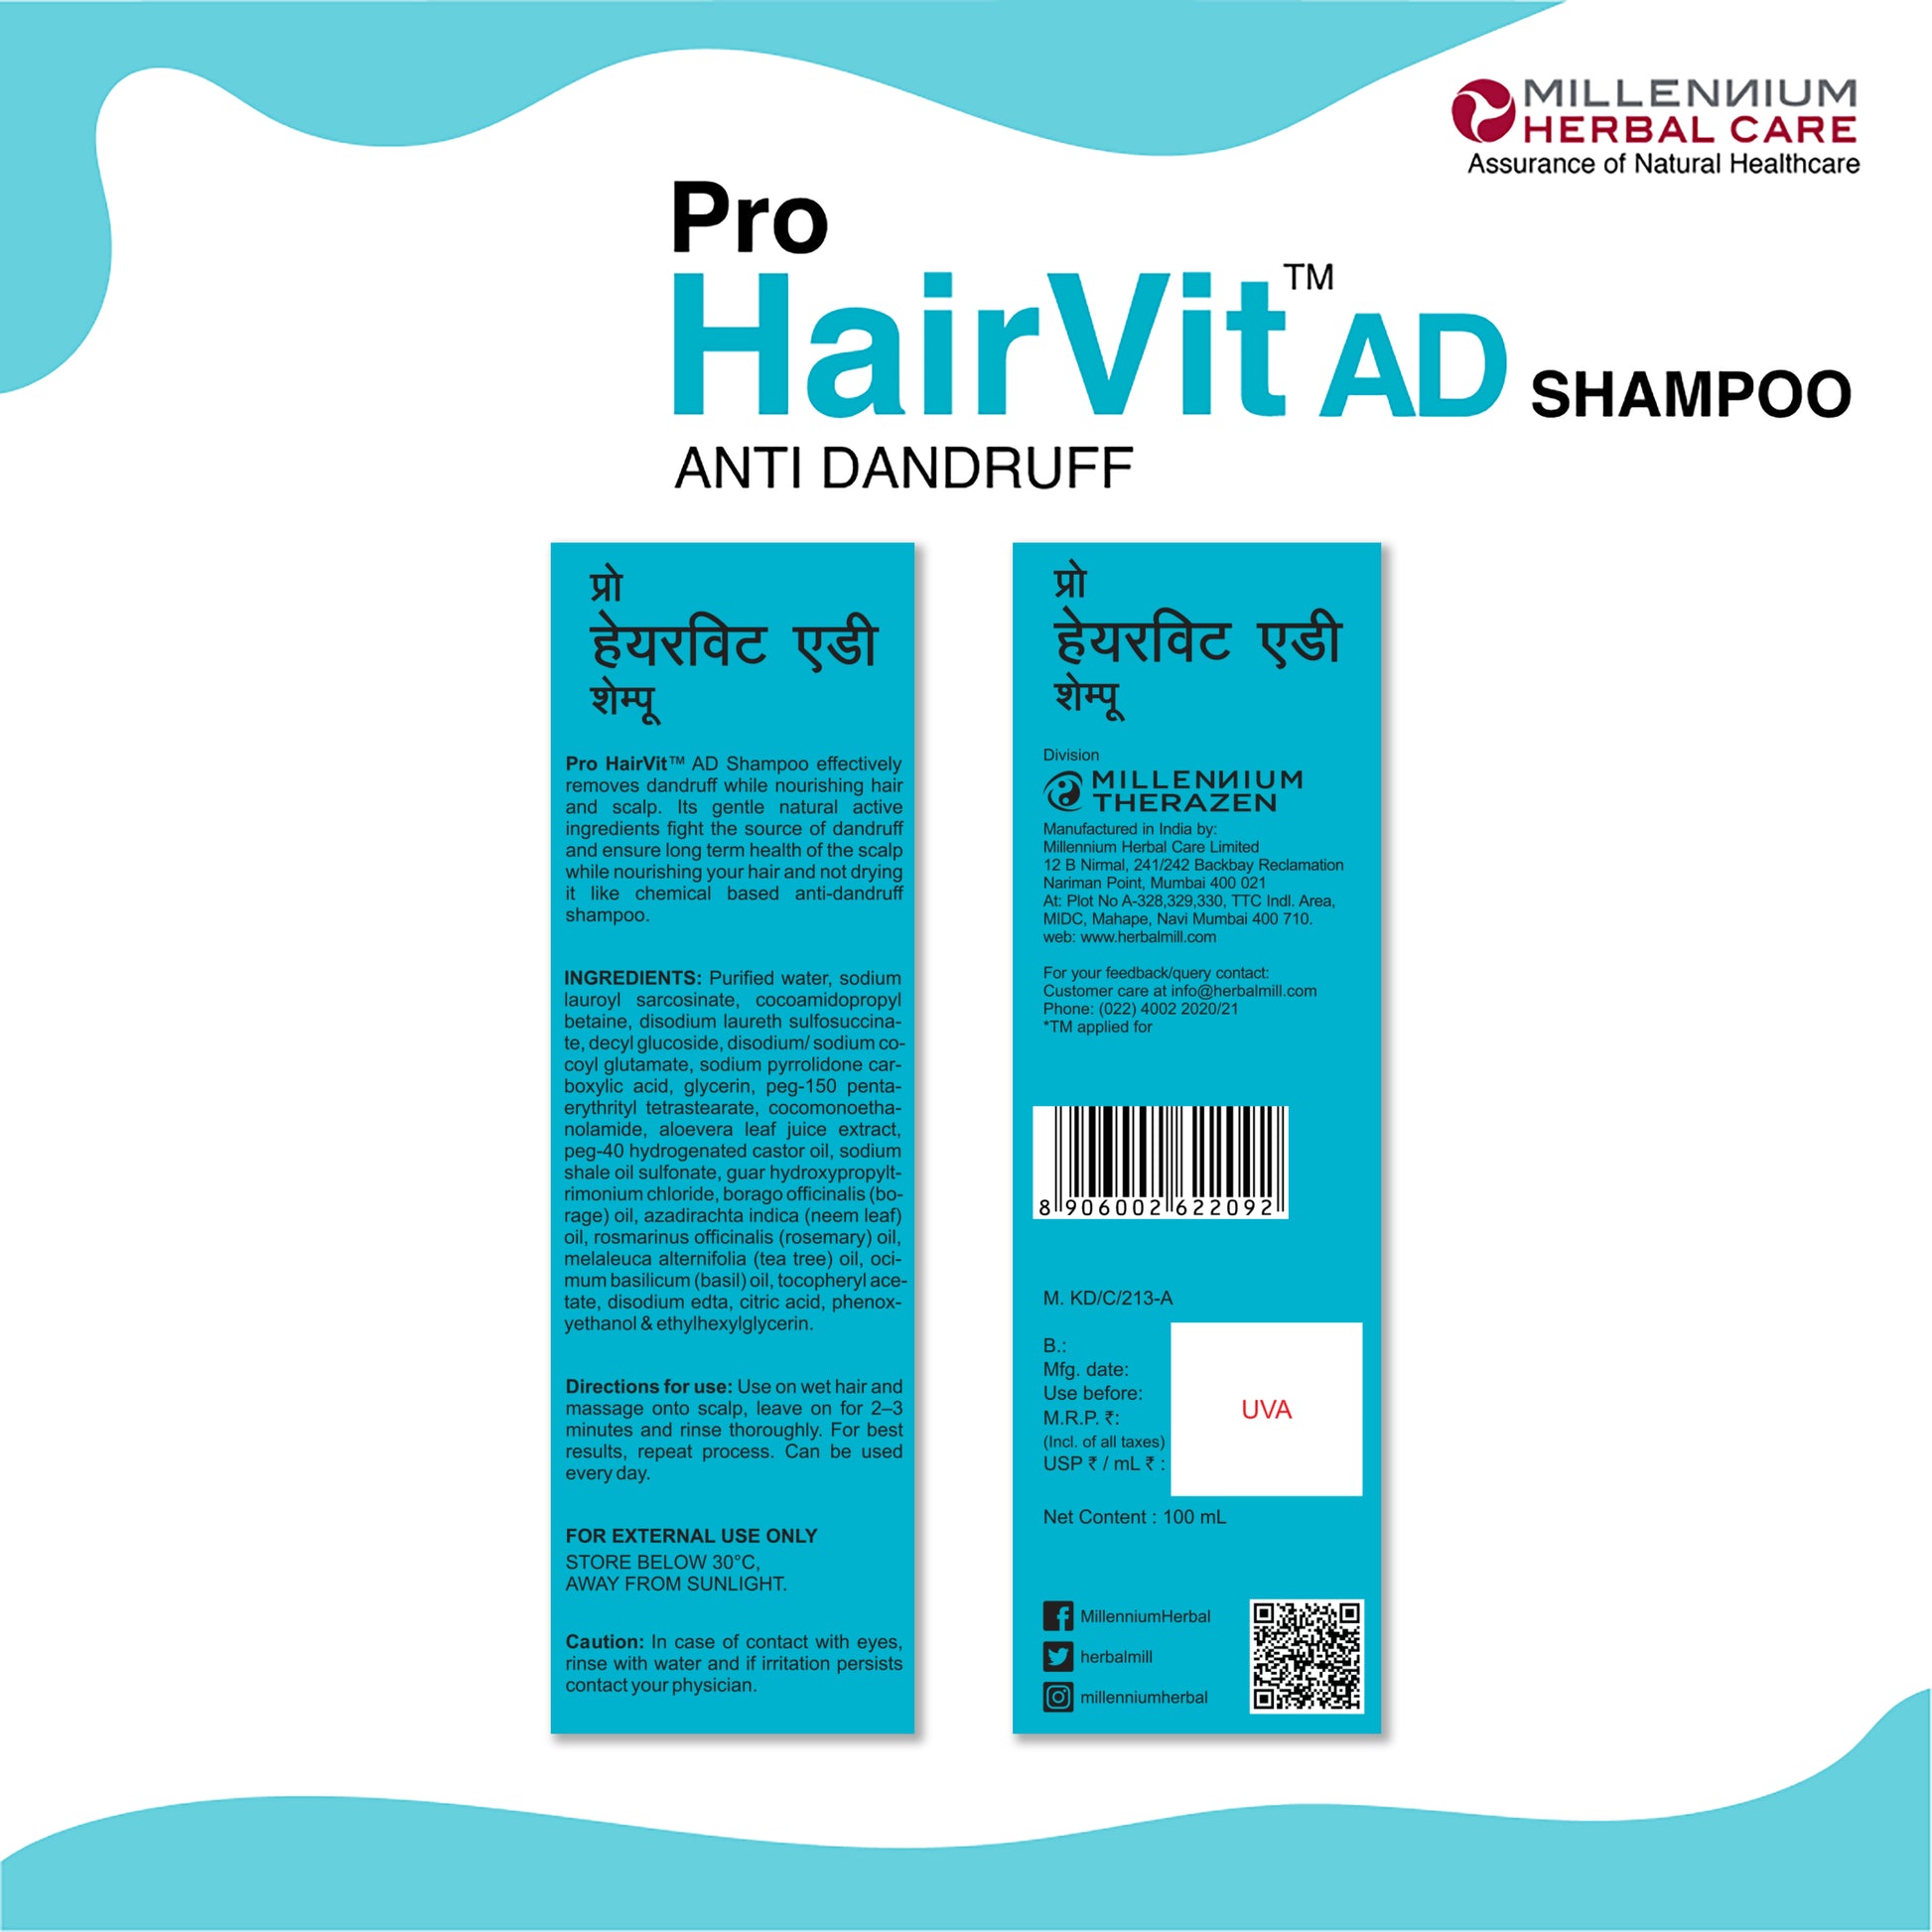 Back of the Pack for Pro Hairvit AD Shampoo